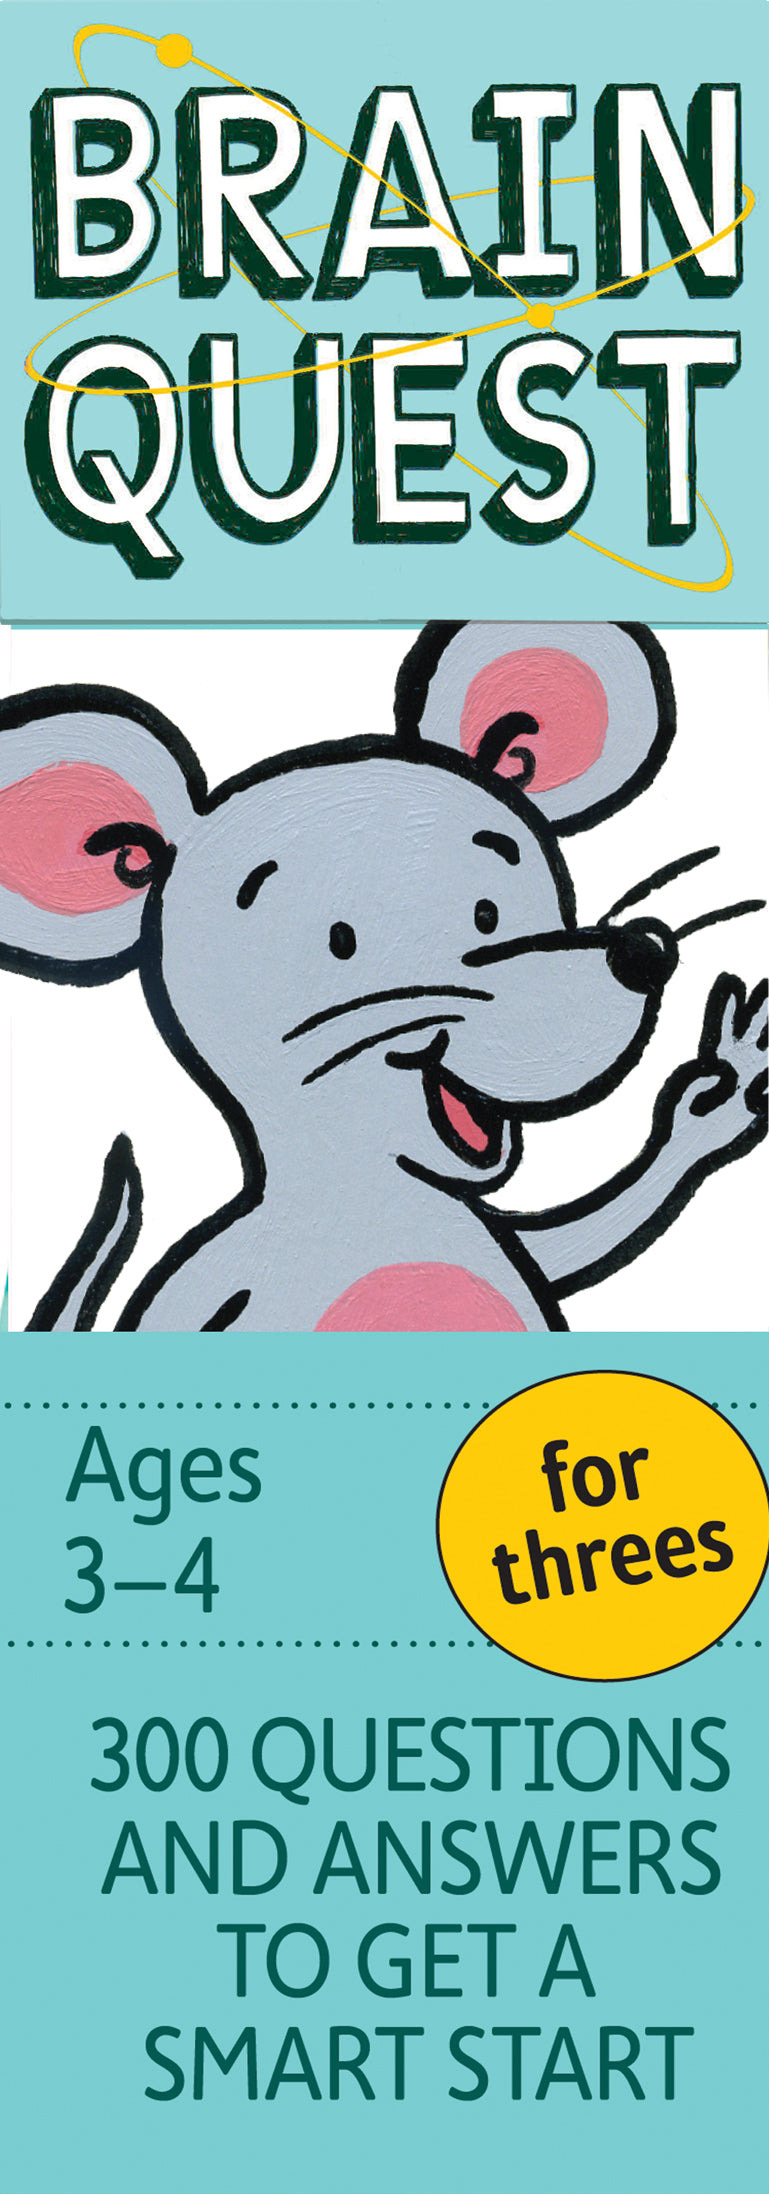 Brain Quest For Threes Ages 3-4